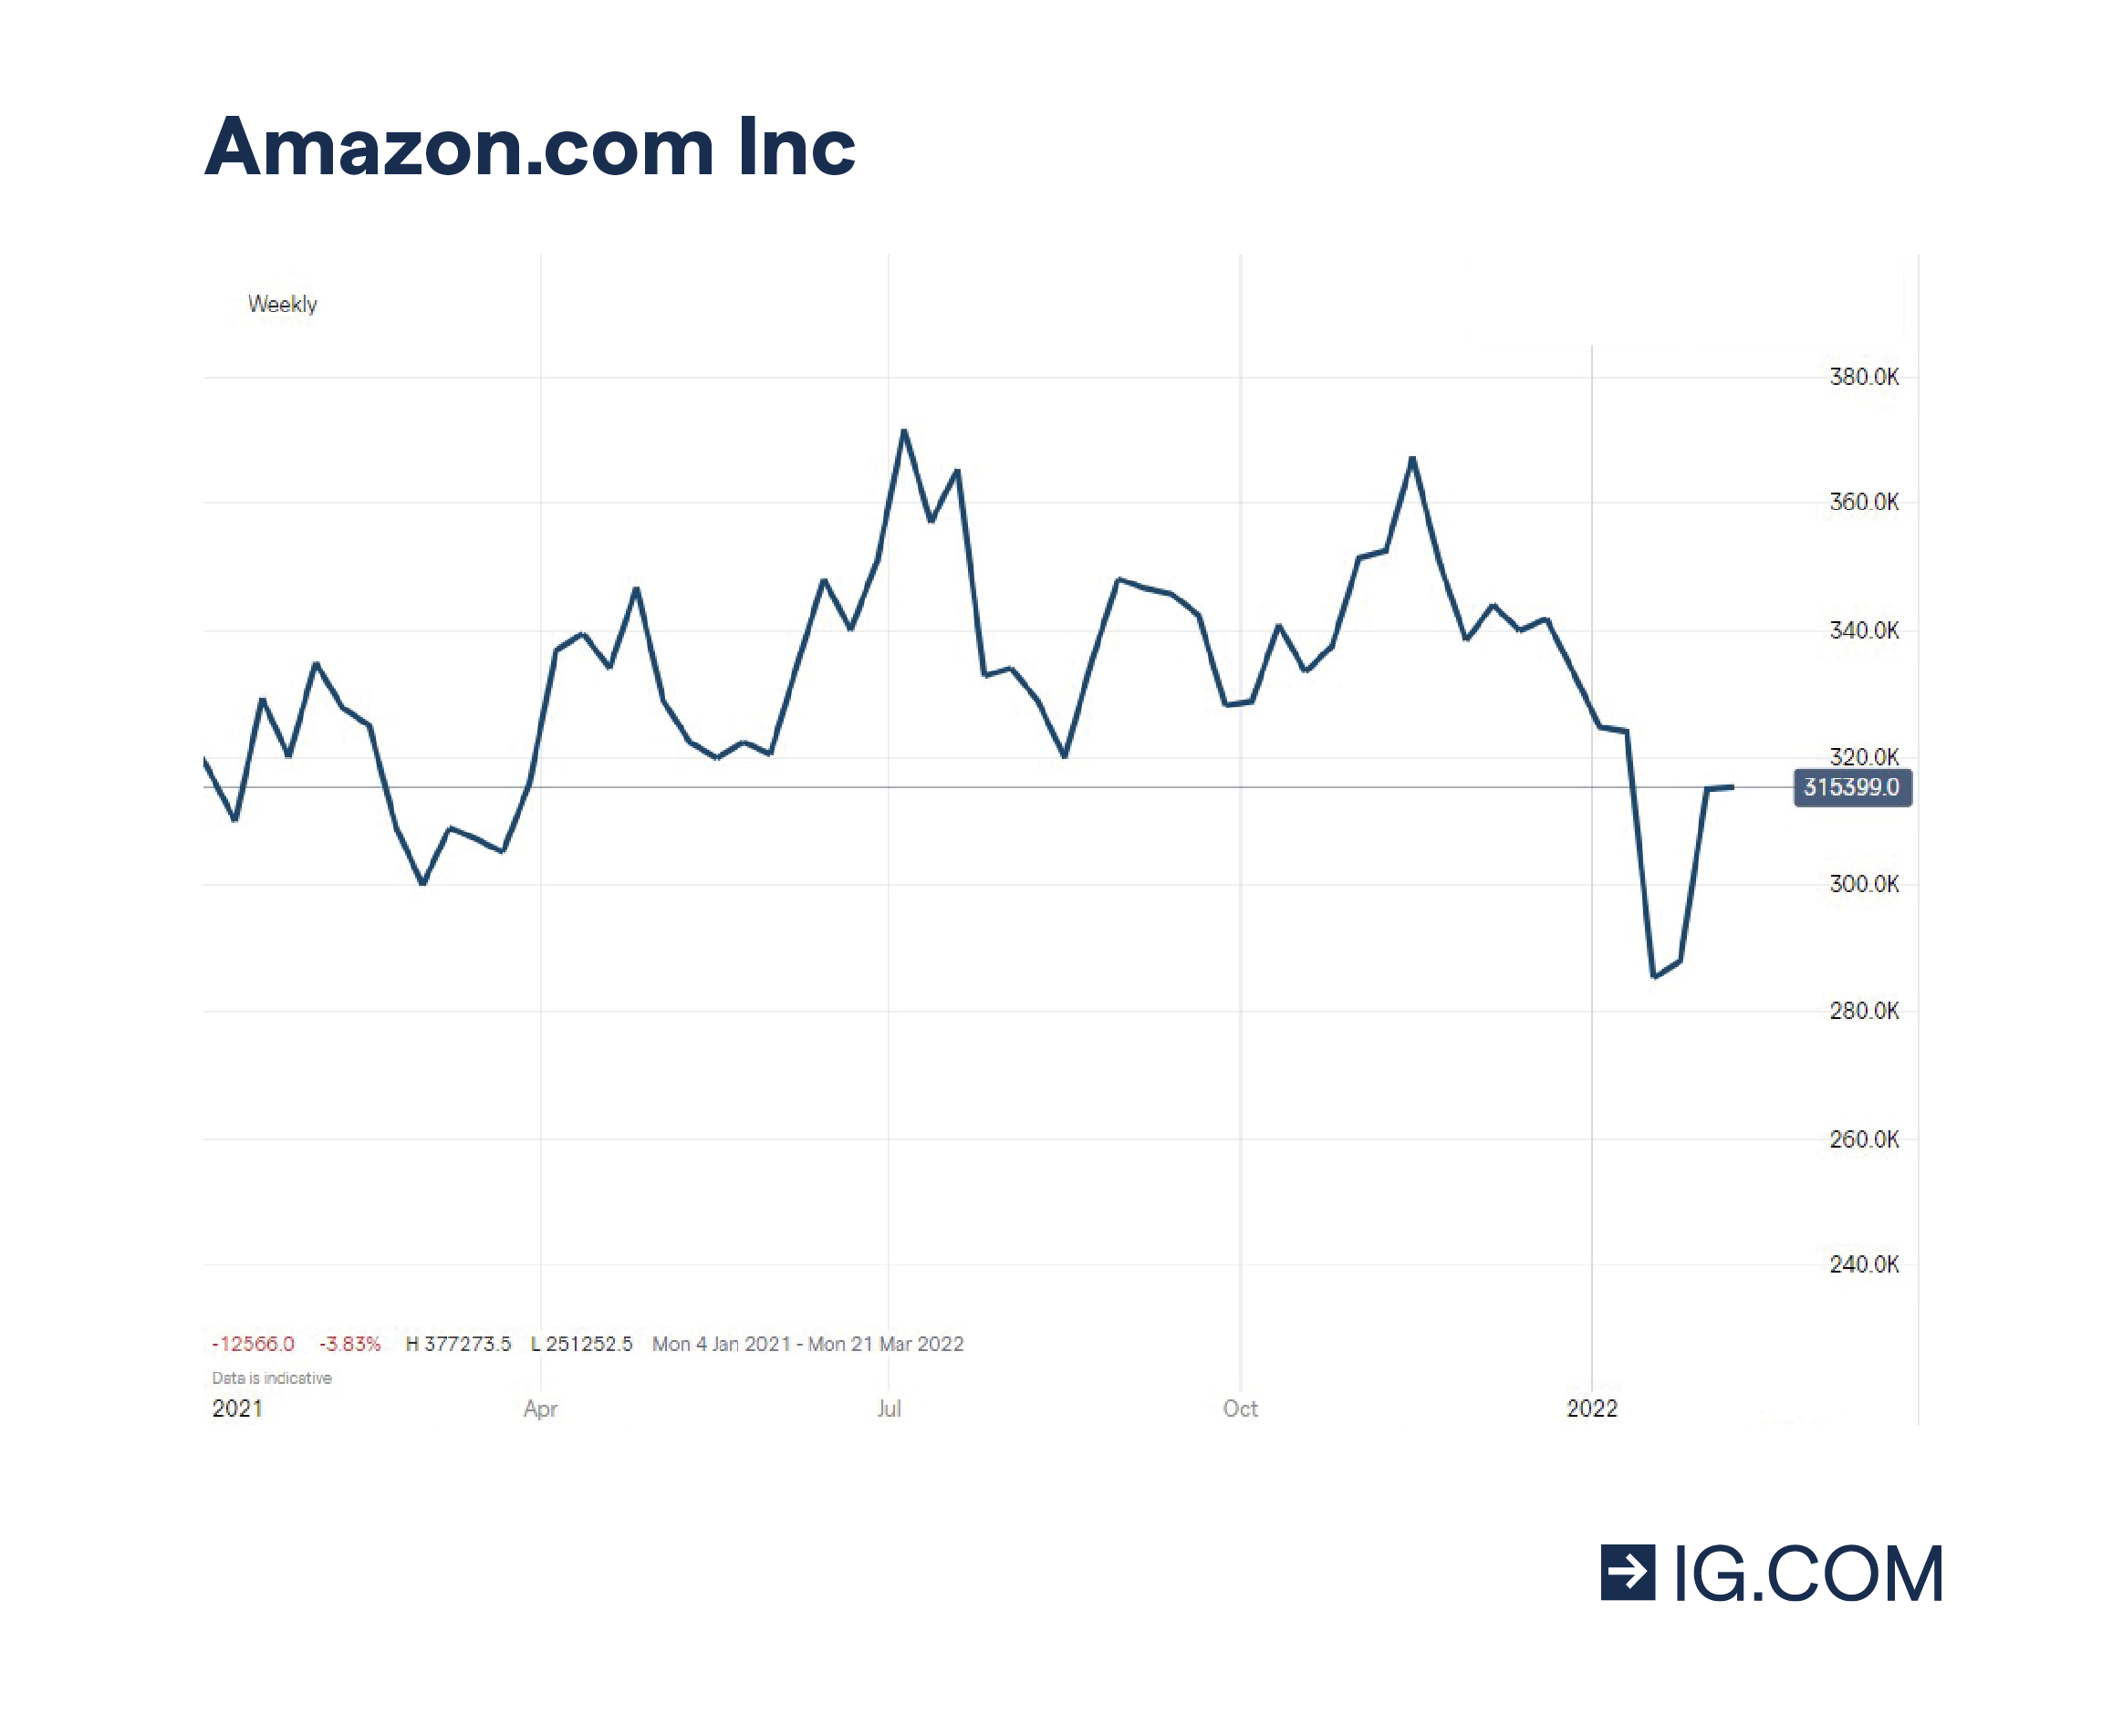 Amazon.com’s recent share price history, which shows plenty of opportunity for the company in the quantum realm.